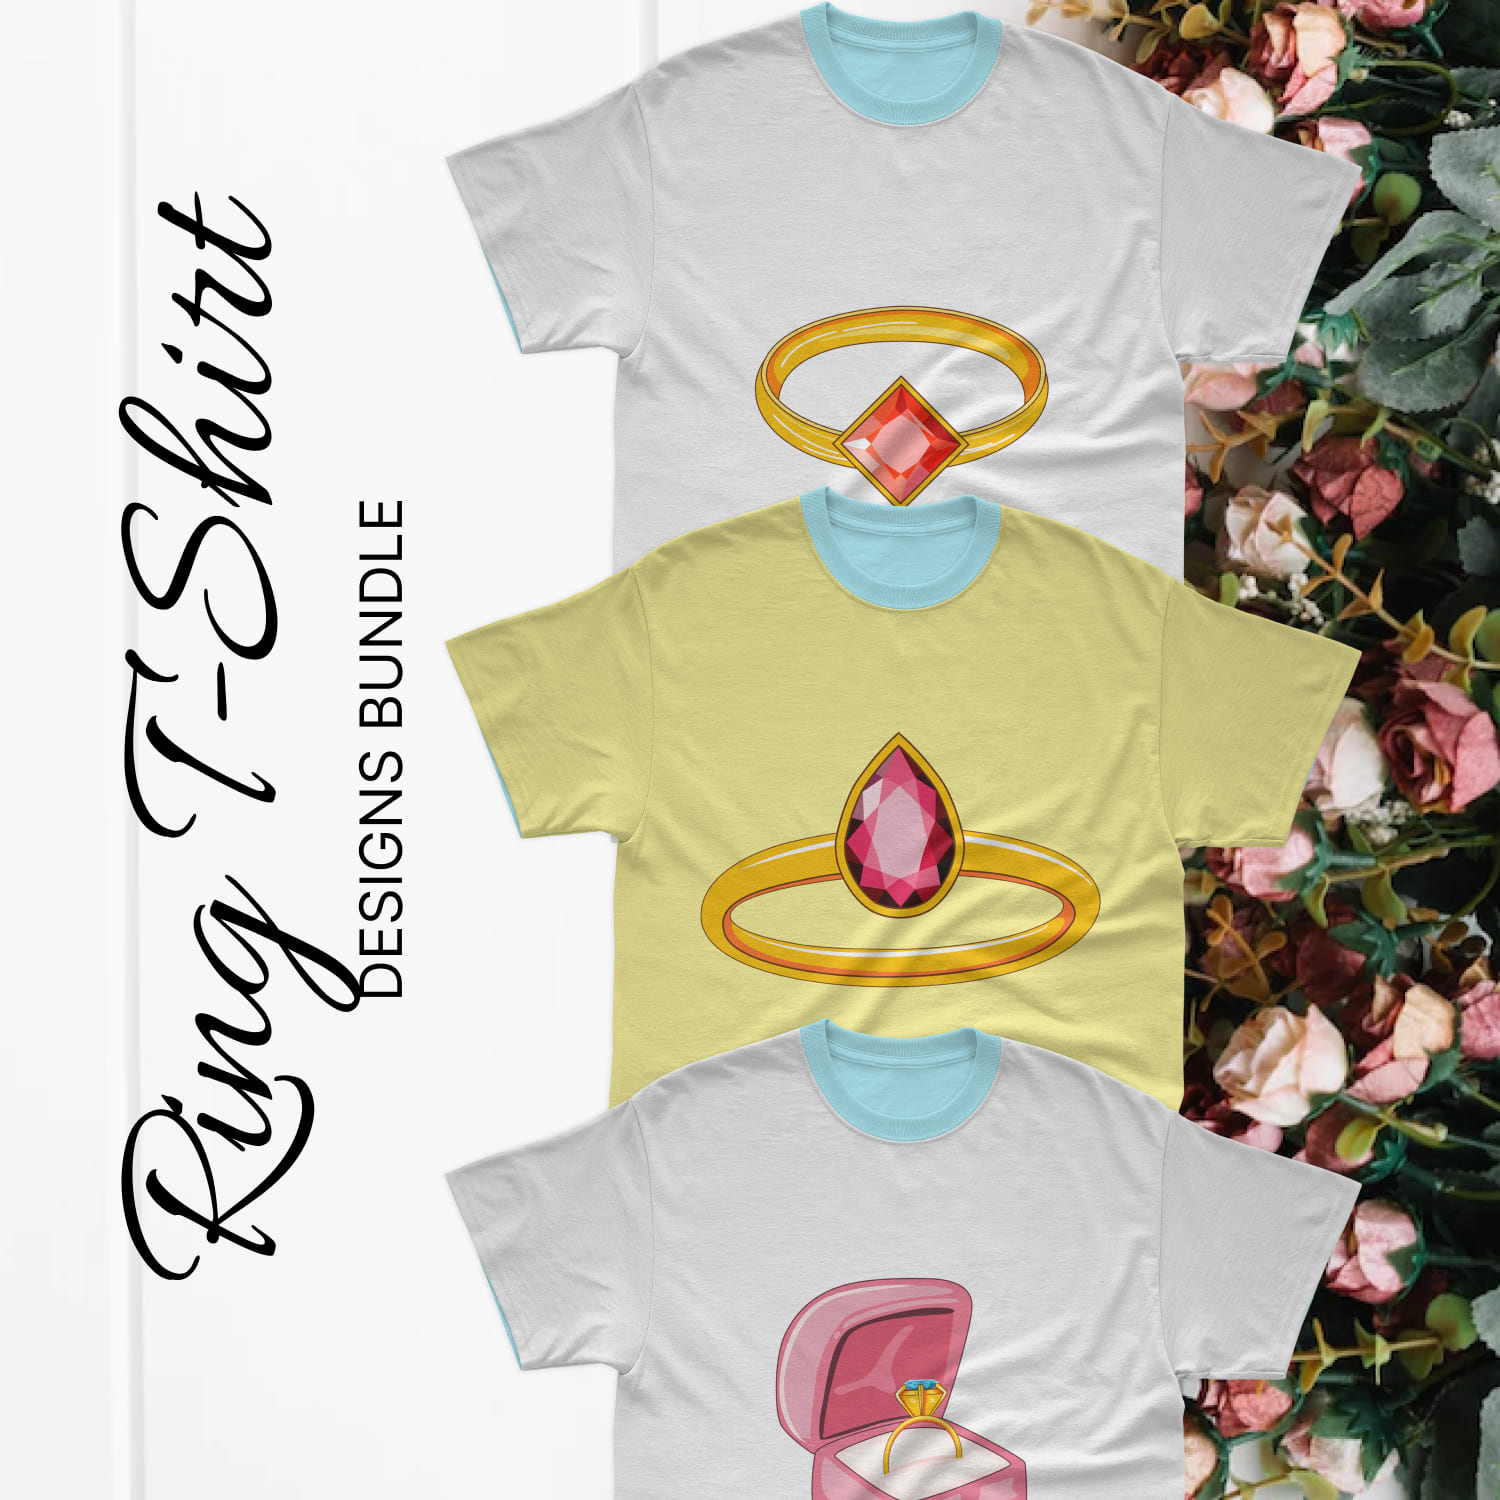 Set of t-shirt images with colorful prints of wedding rings.